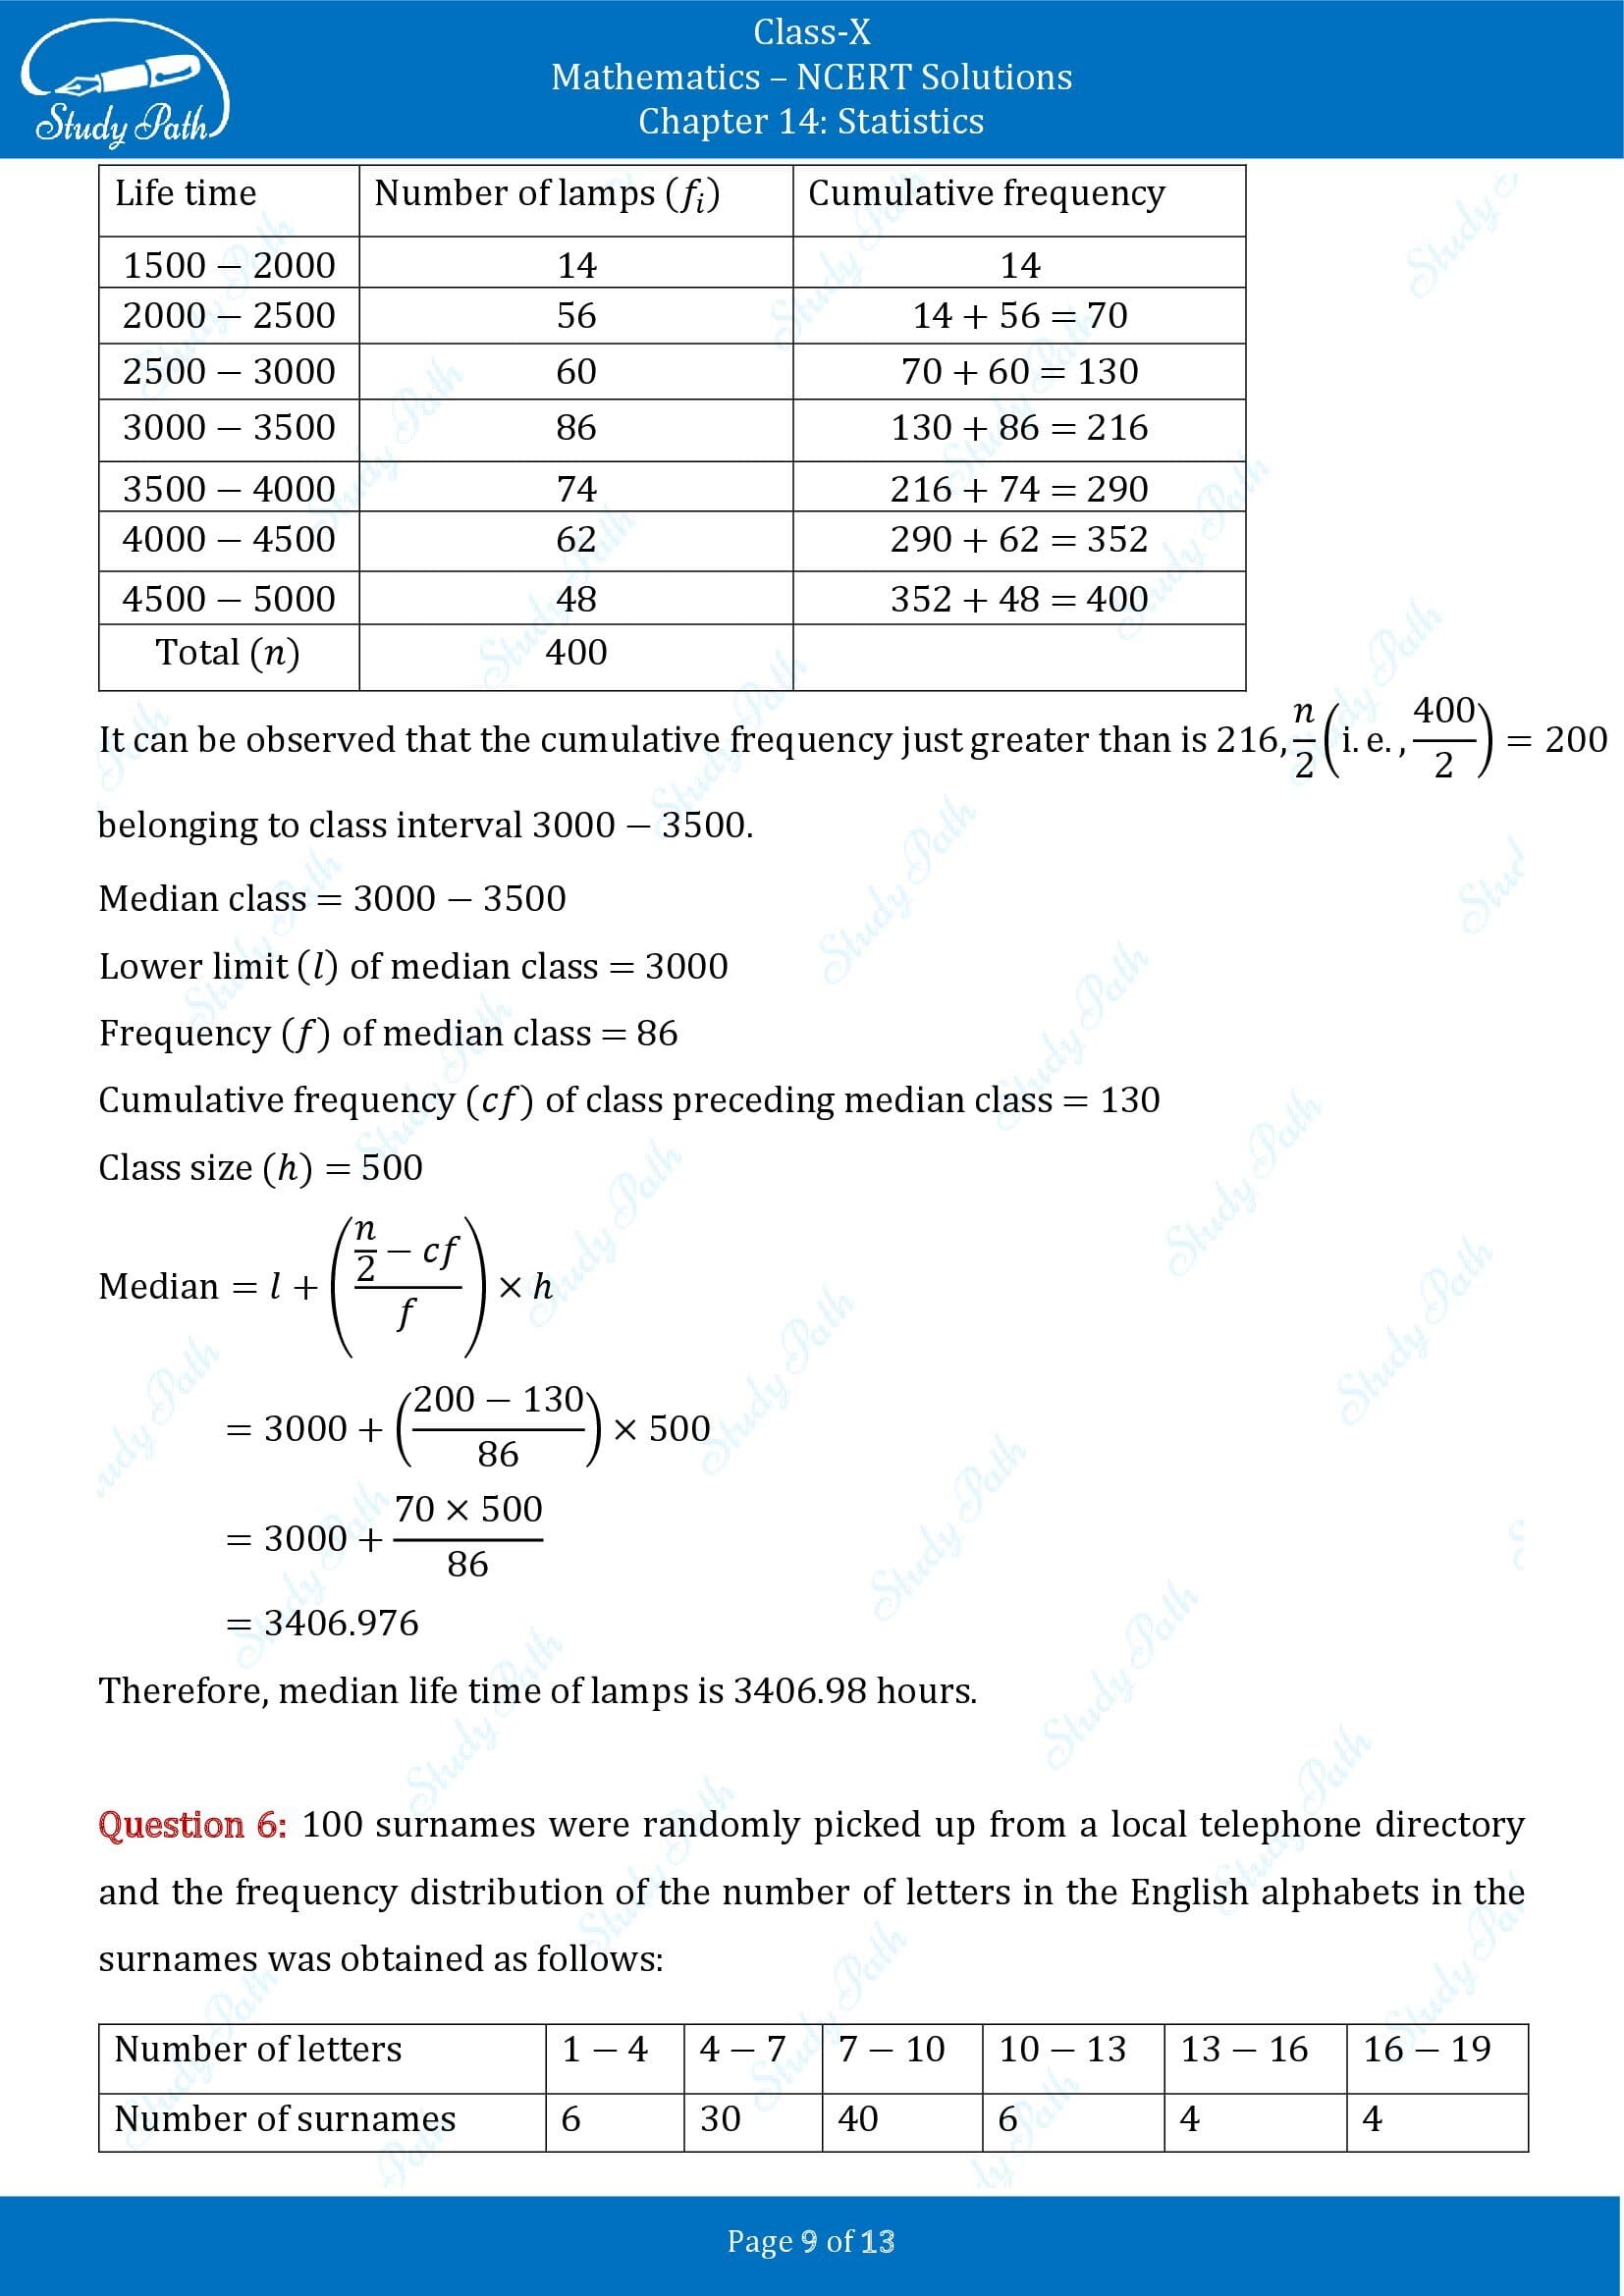 NCERT Solutions for Class 10 Maths Chapter 14 Statistics Exercise 14.3 00009